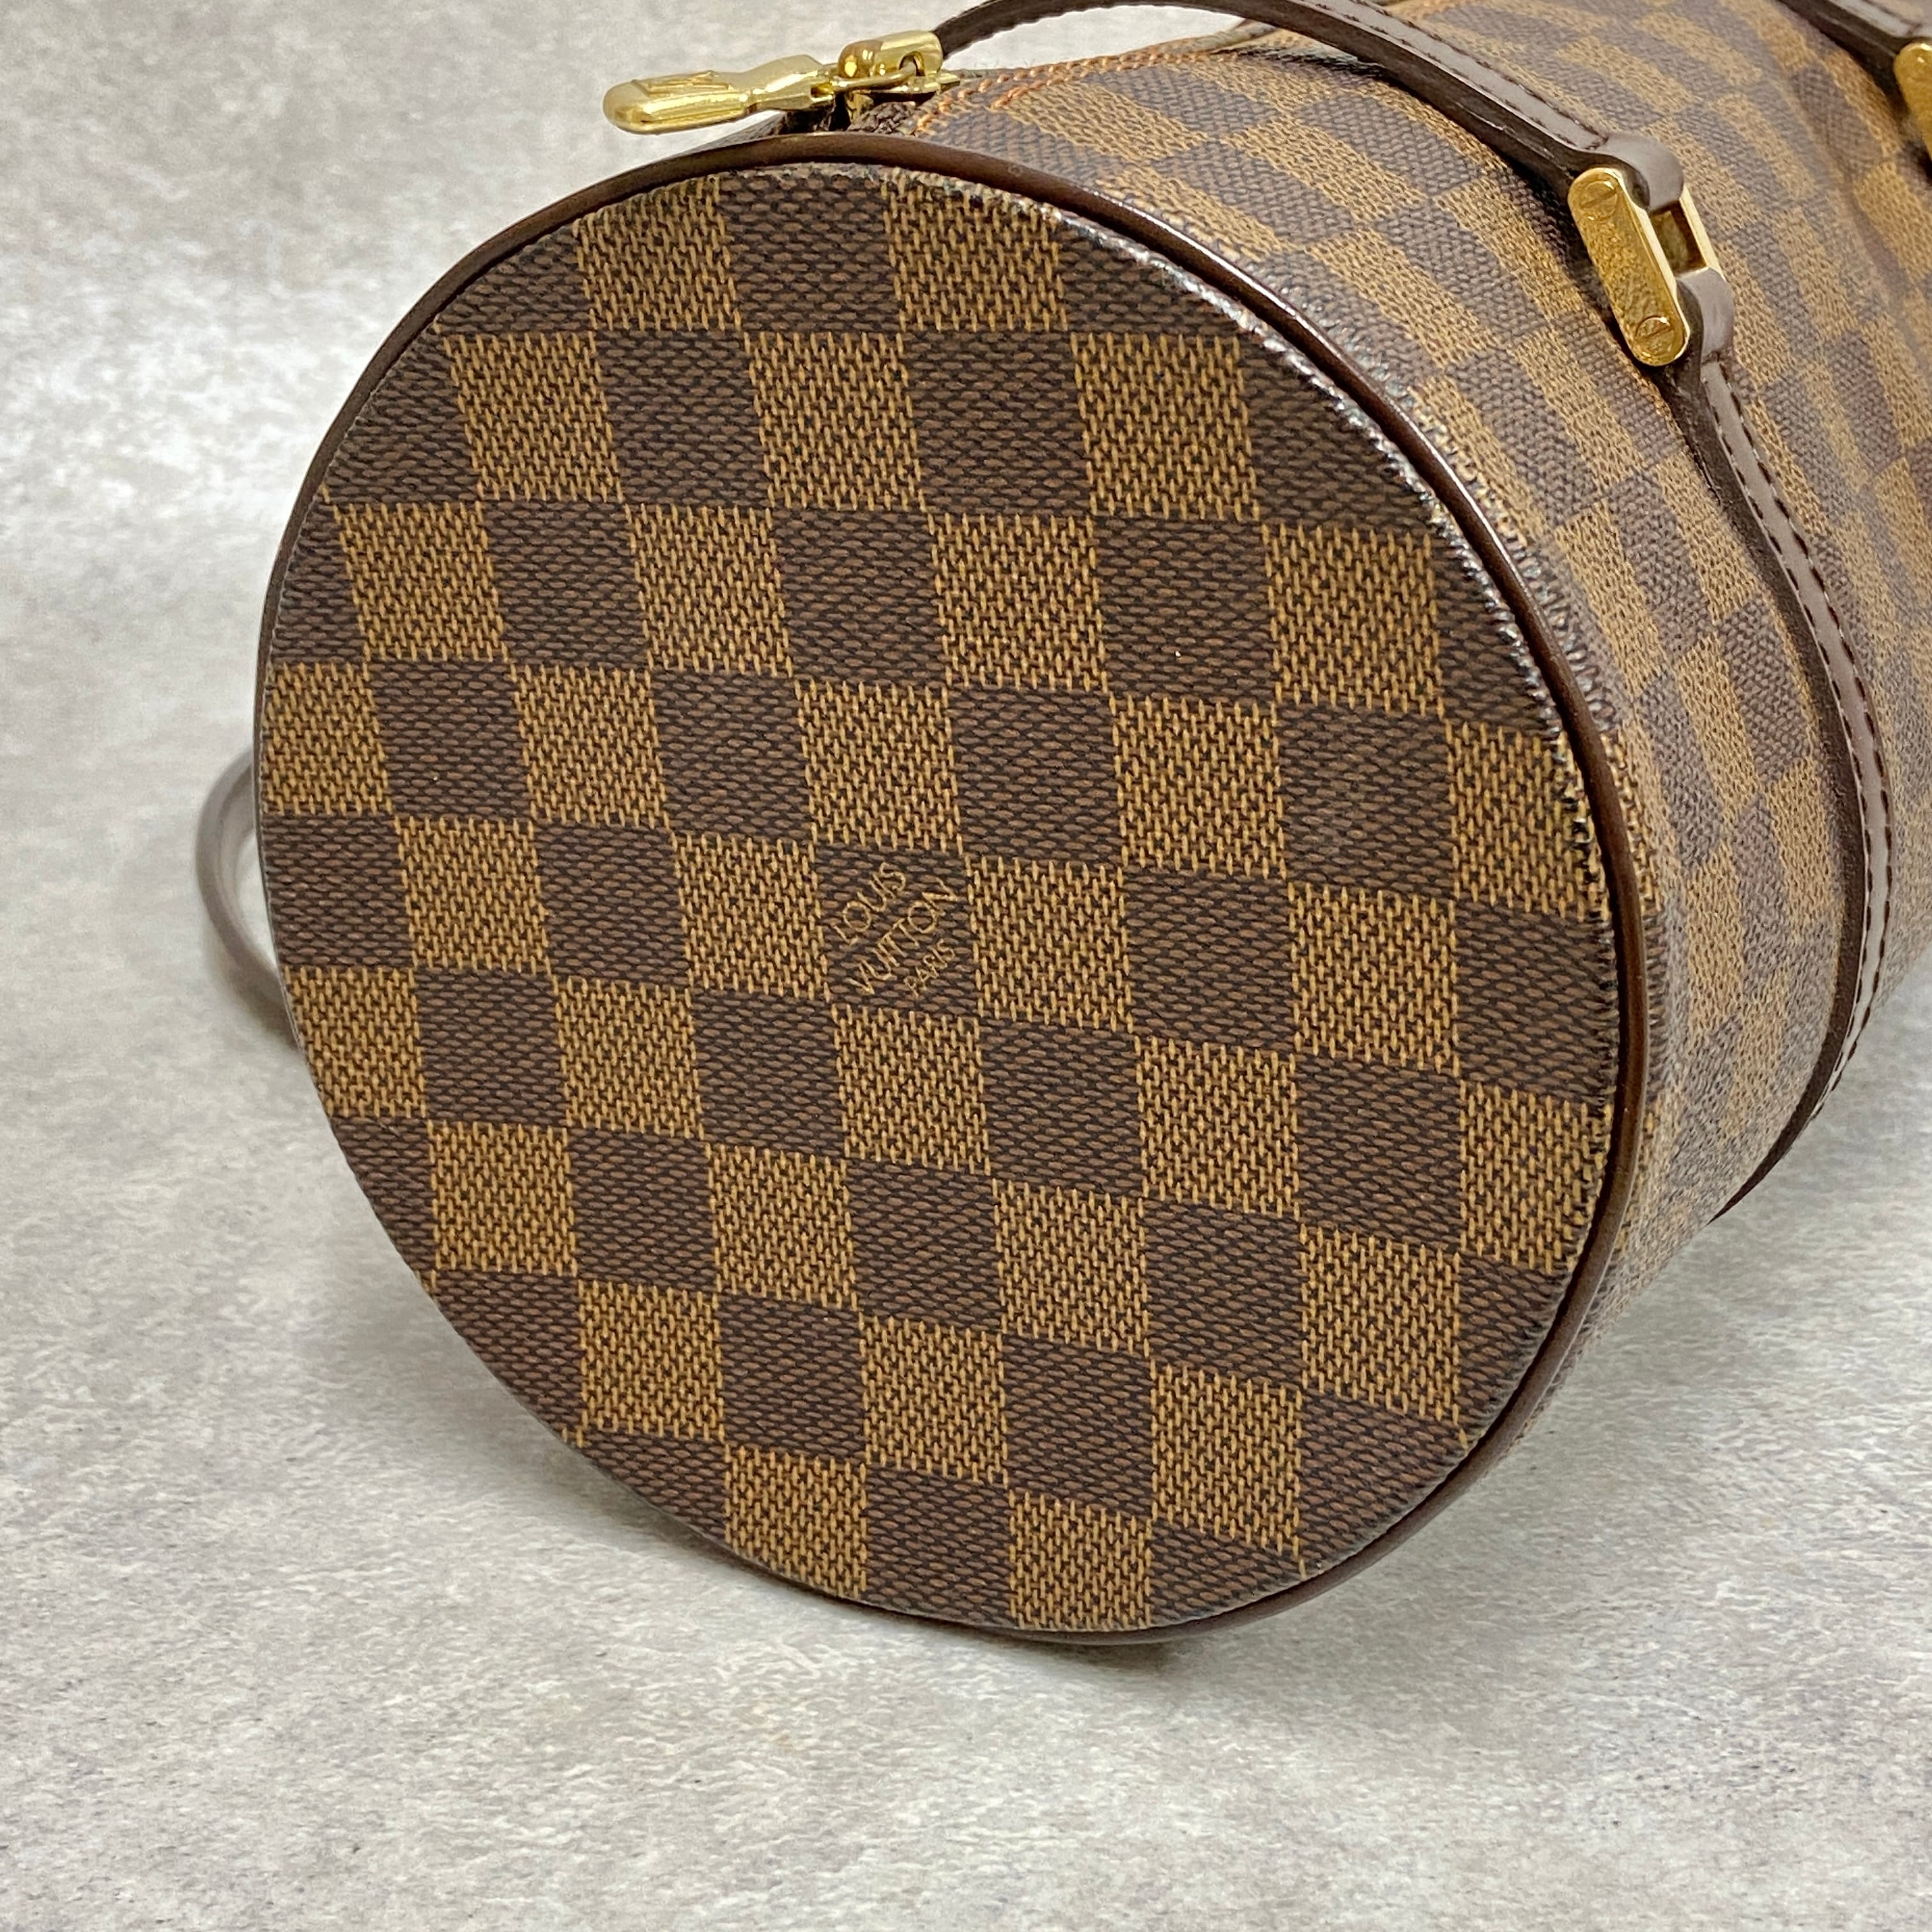 LOUIS VUITTON ルイ・ヴィトン ダミエ パピヨン ハンドバッグ ポーチ付き 5937-202202 | rean powered by  BASE